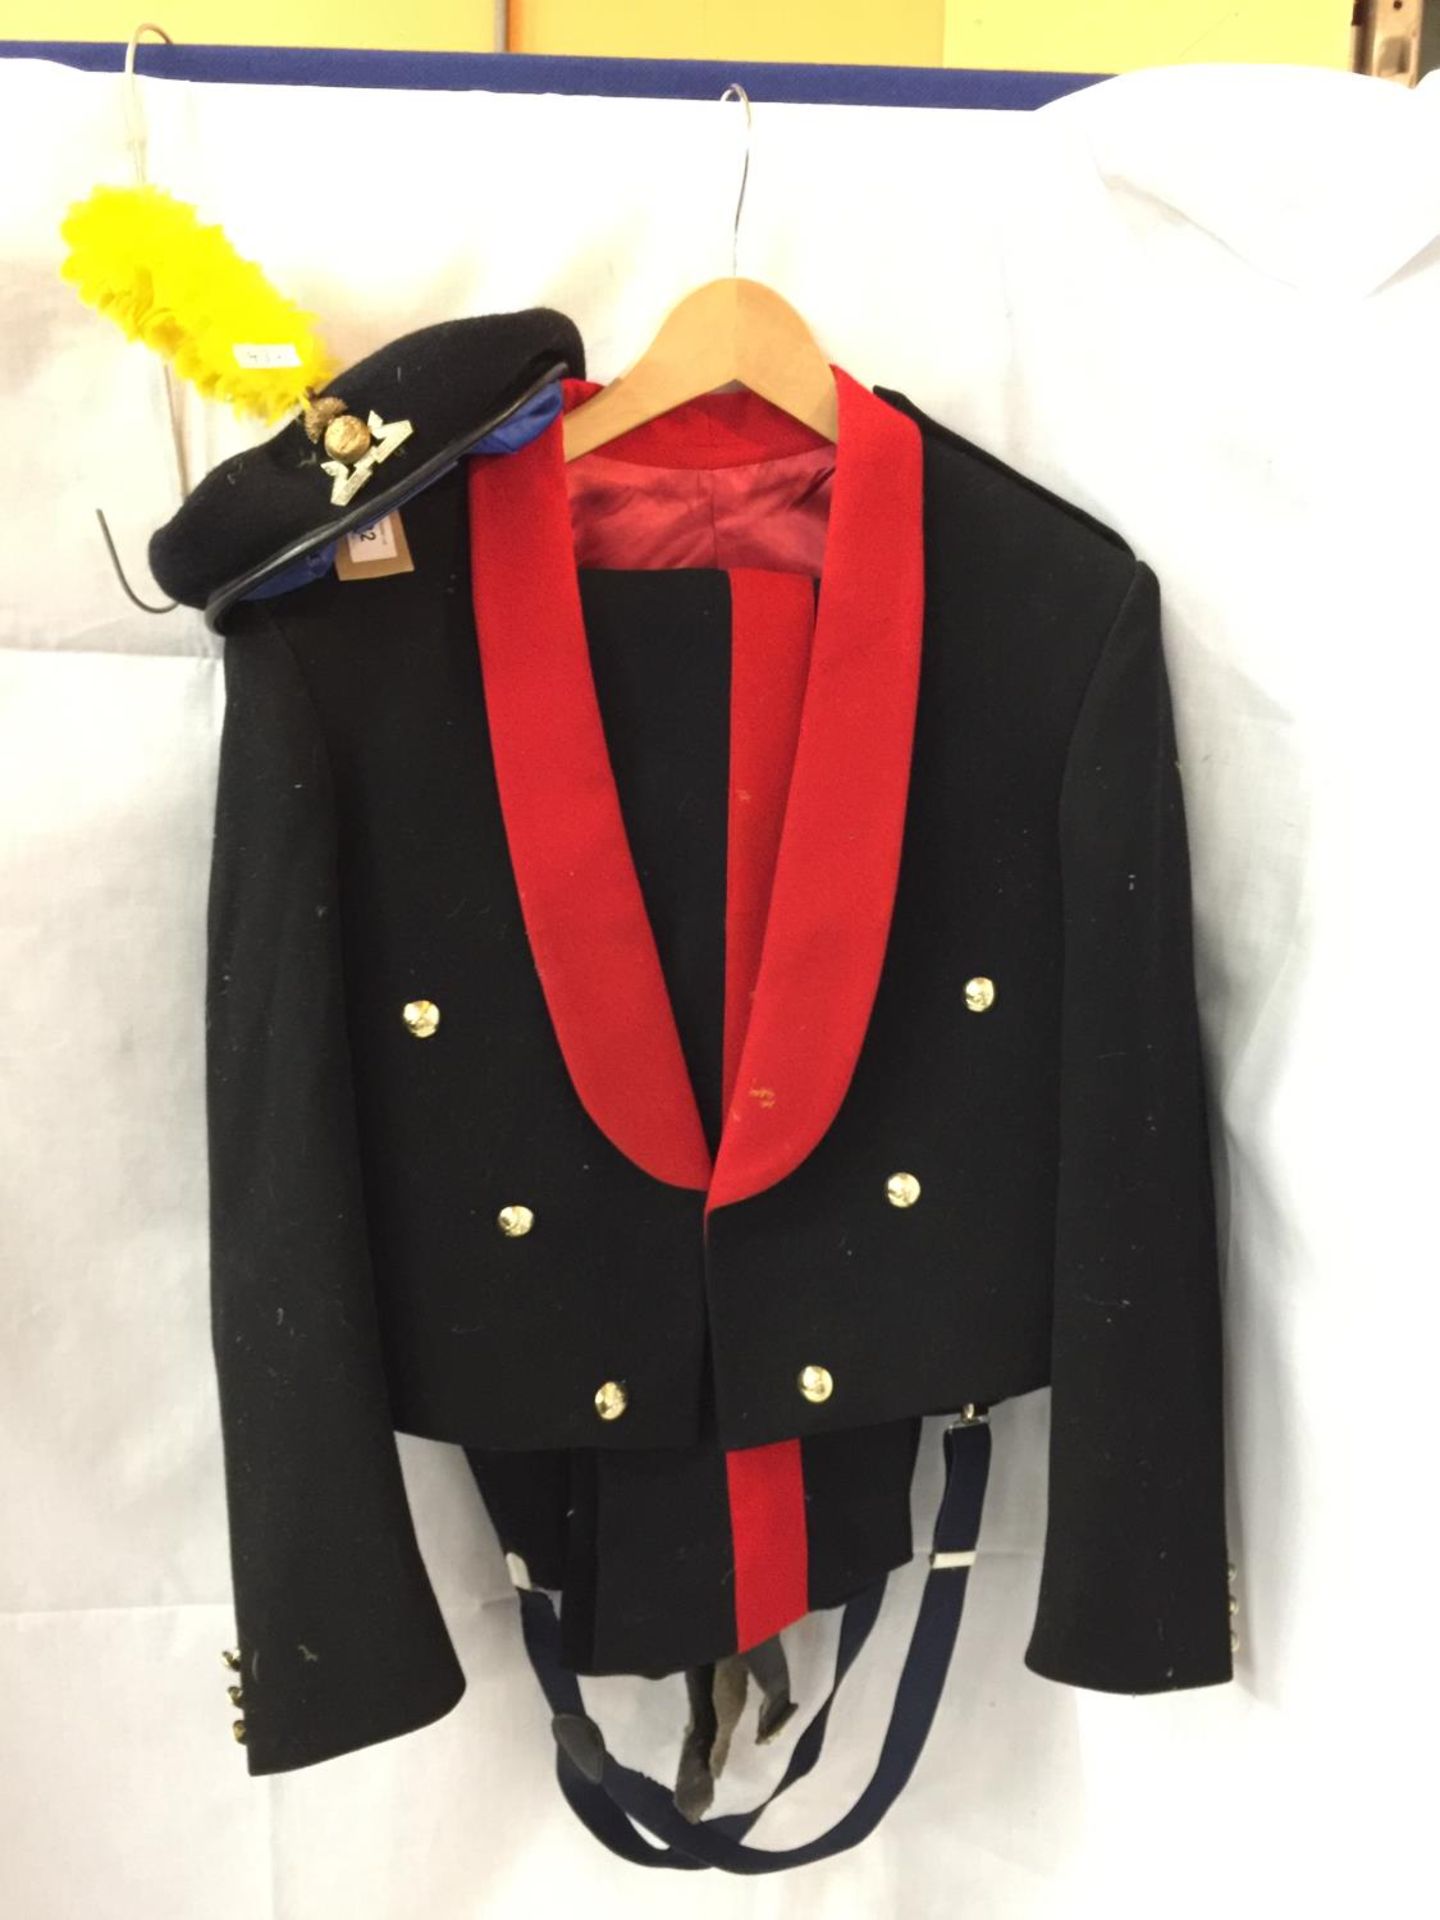 A ROYAL ARTILLERY MESS UNIFORM COMPRISING JACKET AND TROUSERS AND A LANCASHIRE FUSILIERS BERET